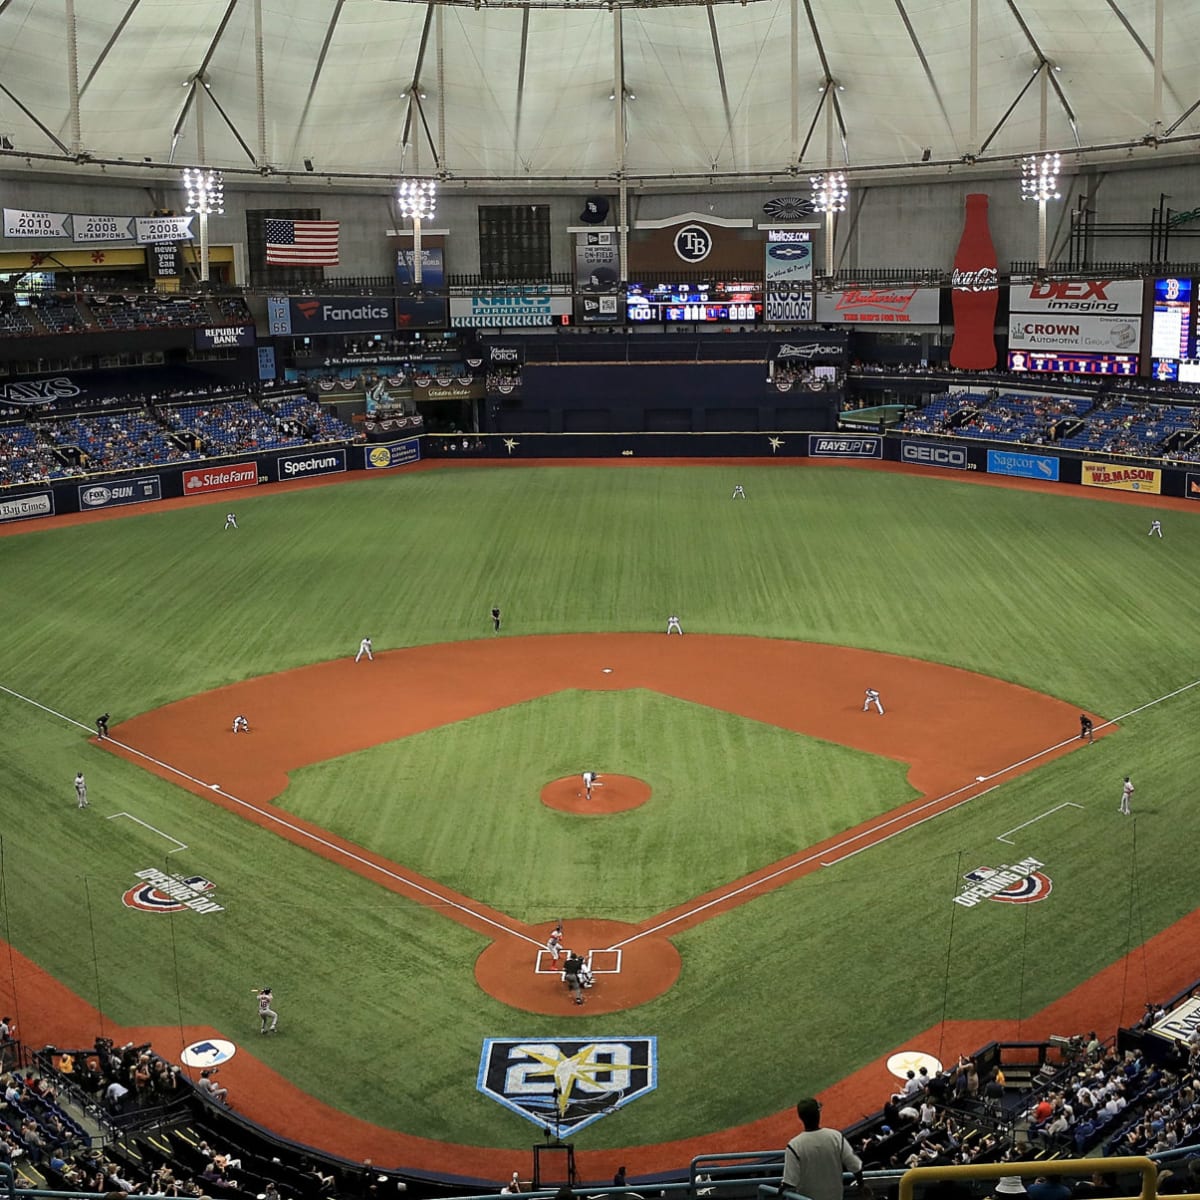 Tampa Bay Rays make agreement for new ballpark in St. Petersburg